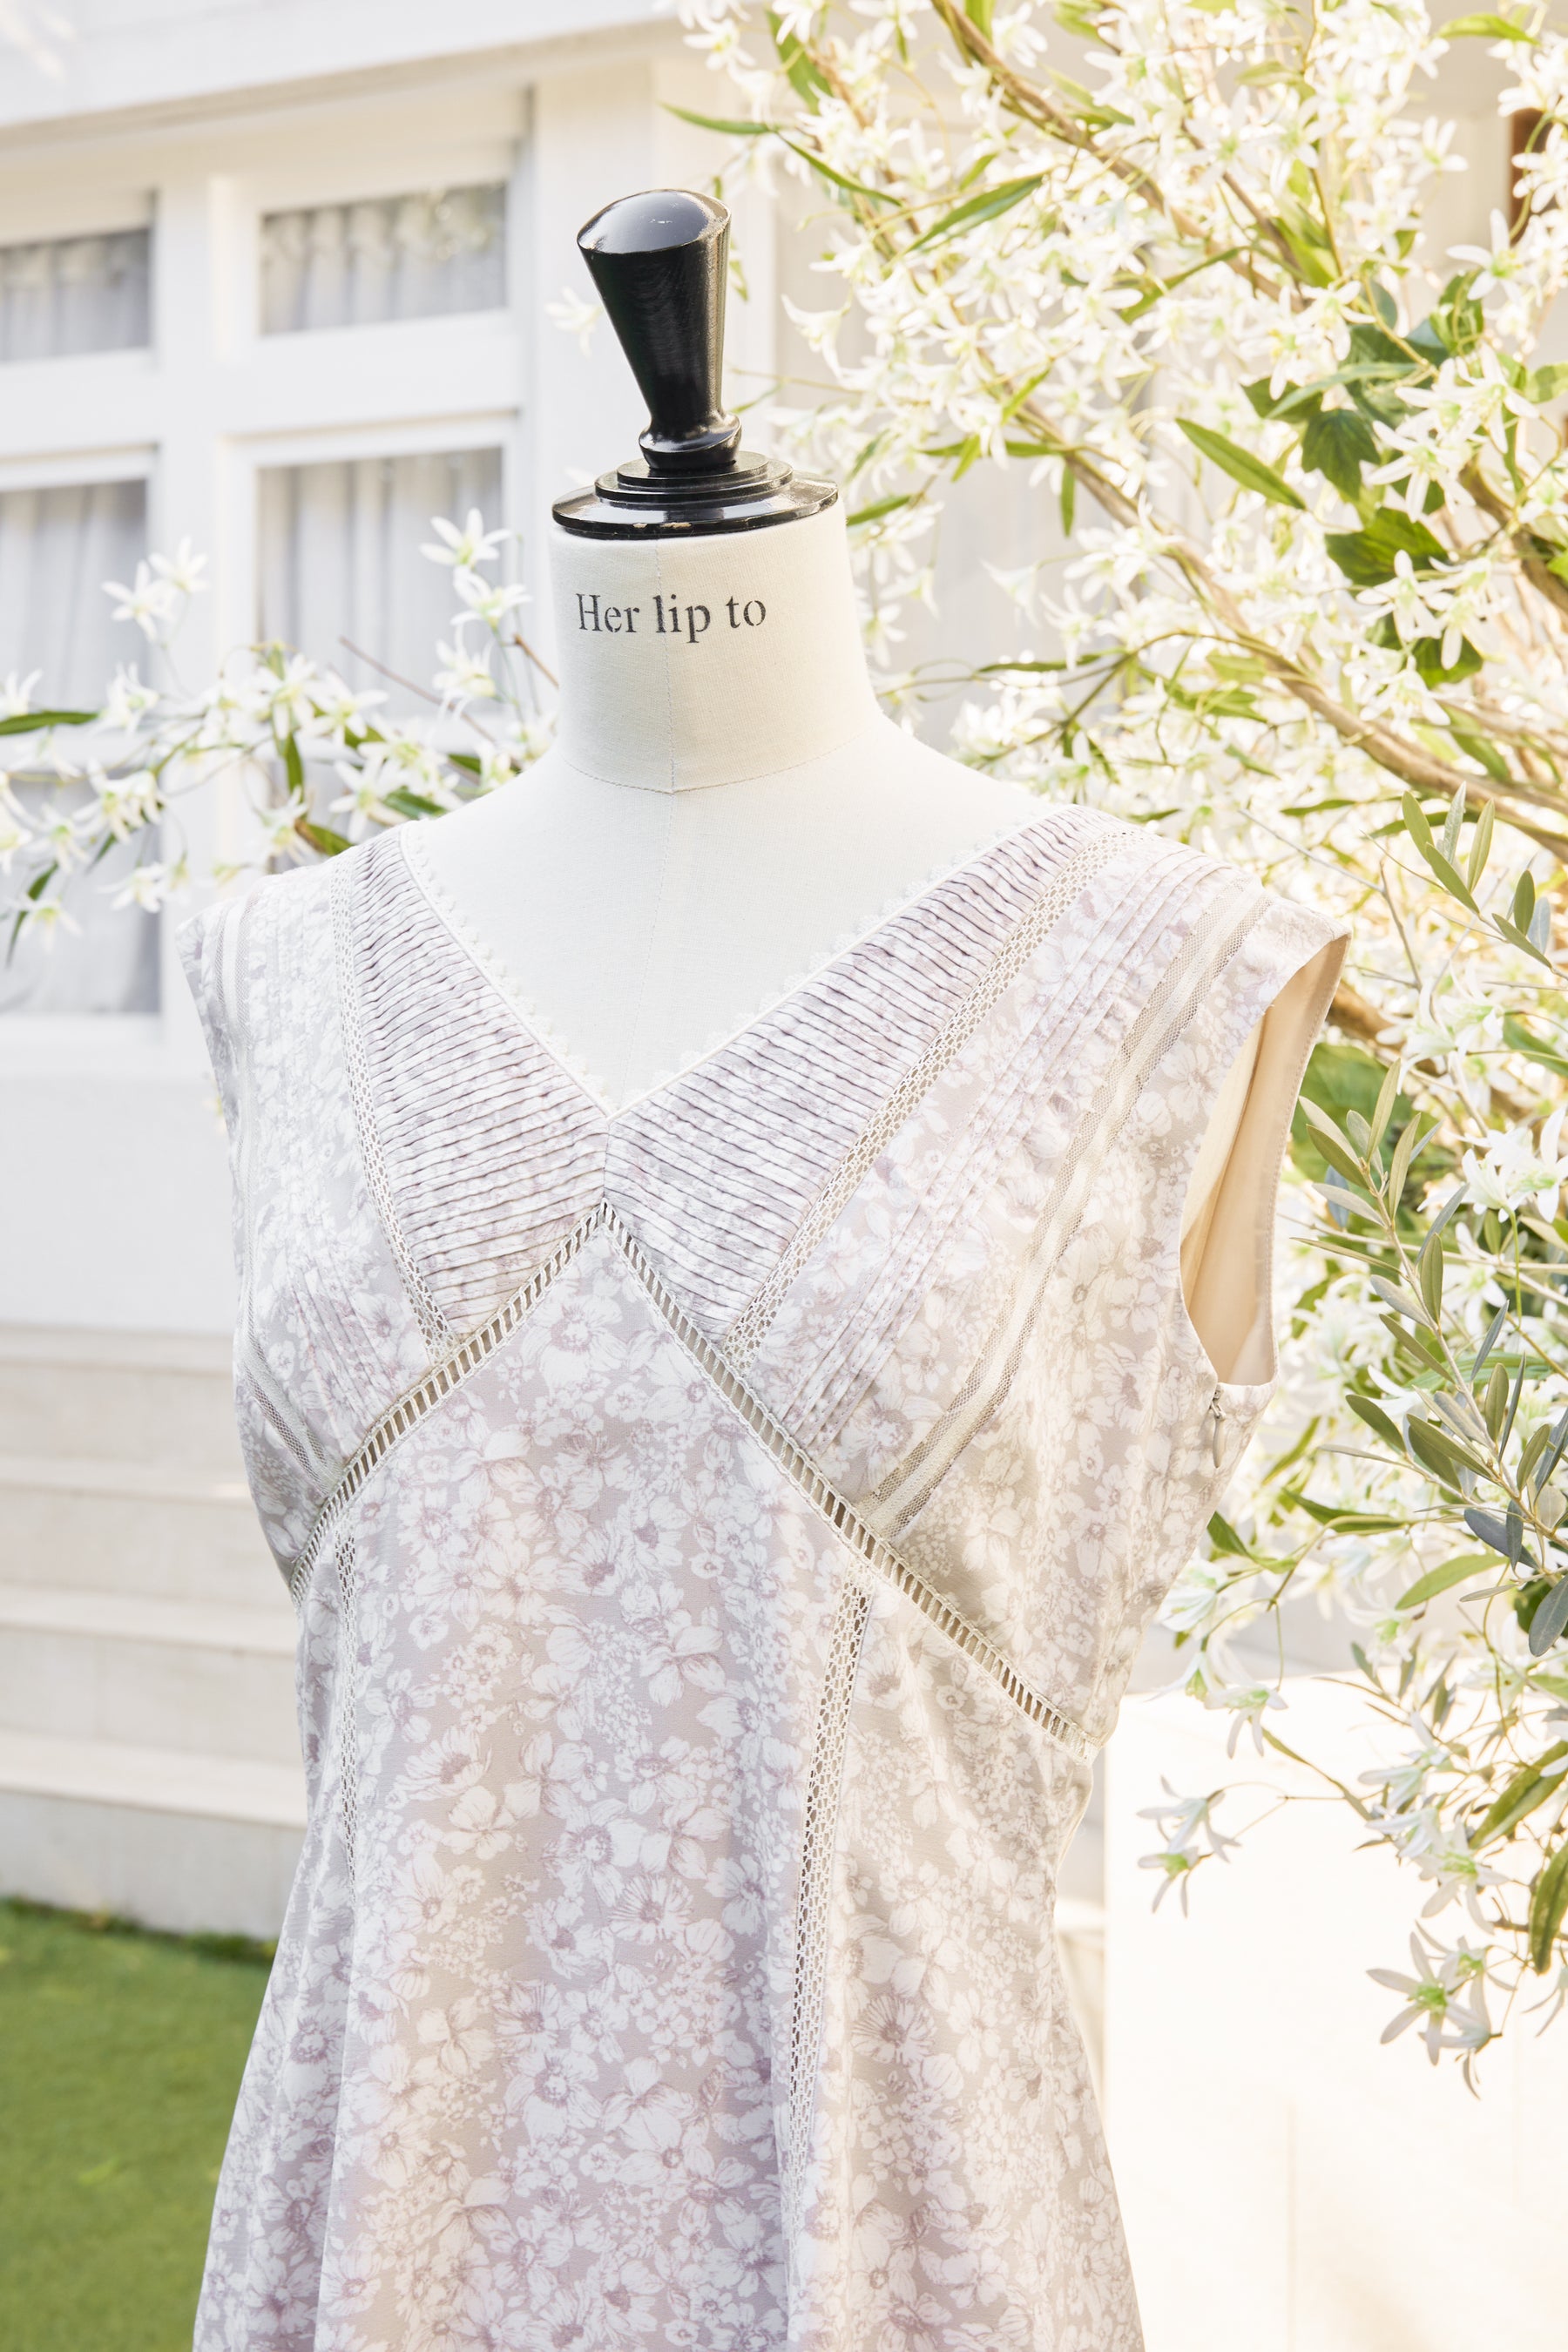 her lip to Lace Trimmed Floral Dress | www.beverlyhillsmagazine.com